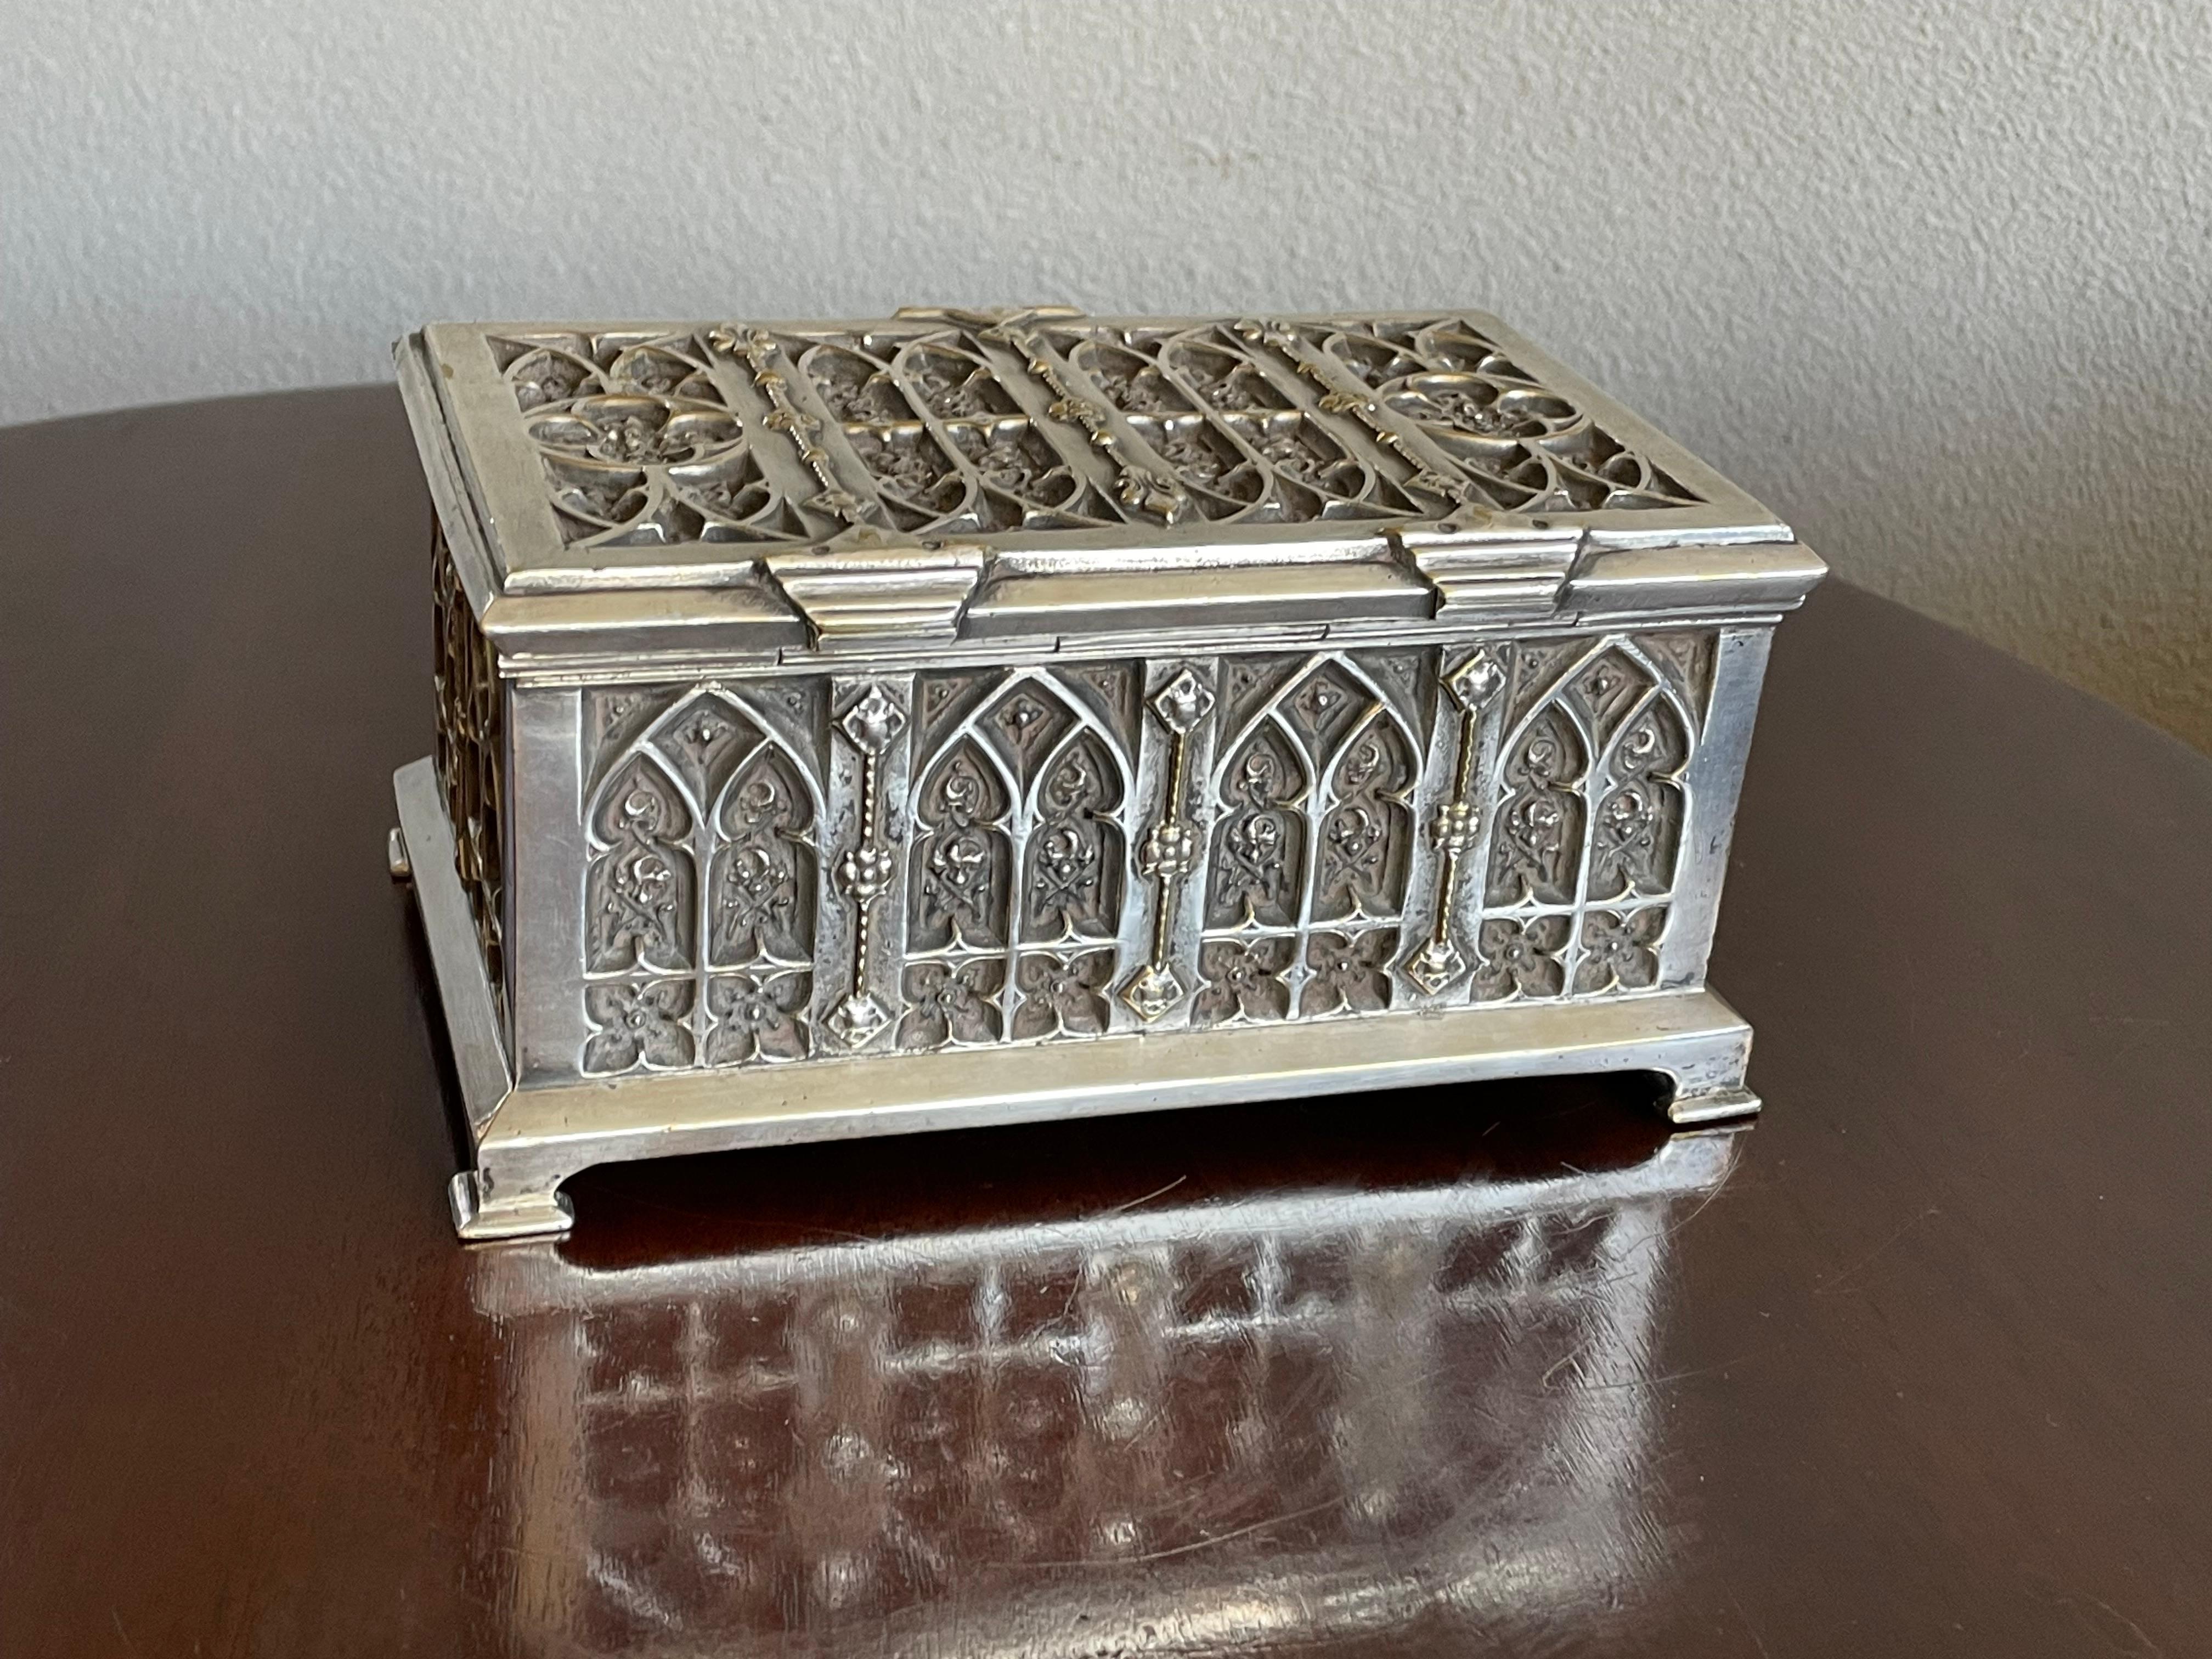 Velvet Stunning Gothic Revival Silvered Bronze Jewelry Box with Church Window Panels